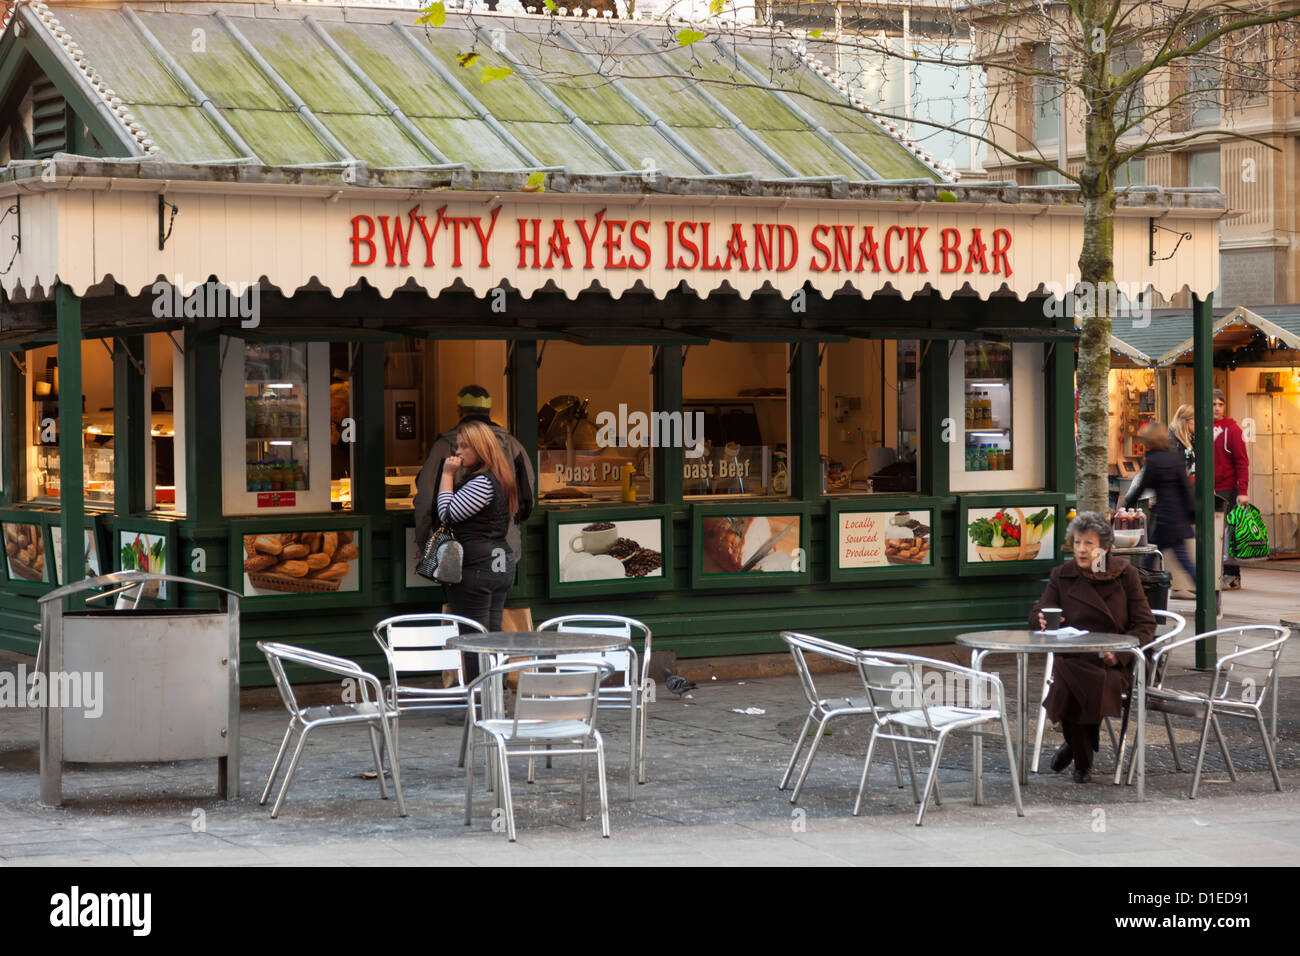 Bwyty Hayes island snack bar, open air outside snack bar serving snacks and beverages to shoppers and city center workers. Stock Photo